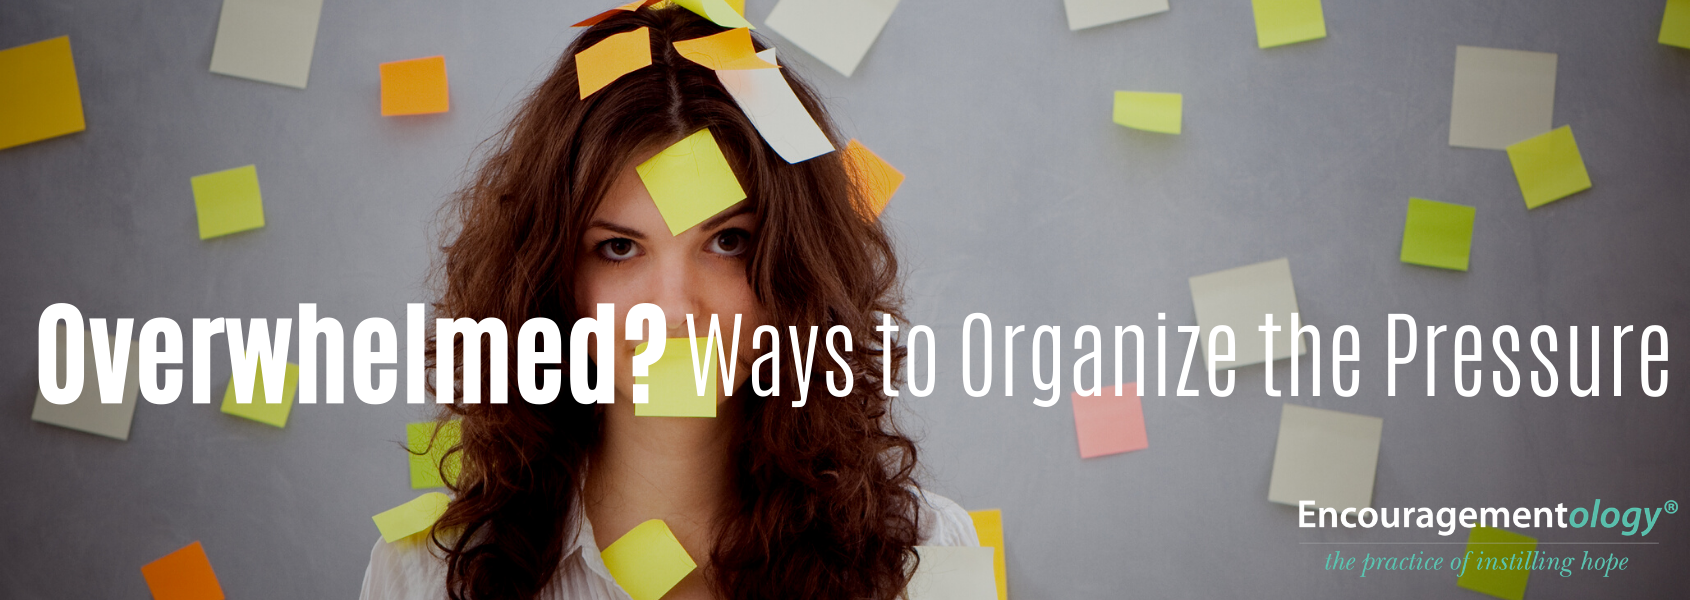 Overwhelmed, Ways to Organize the Pressure